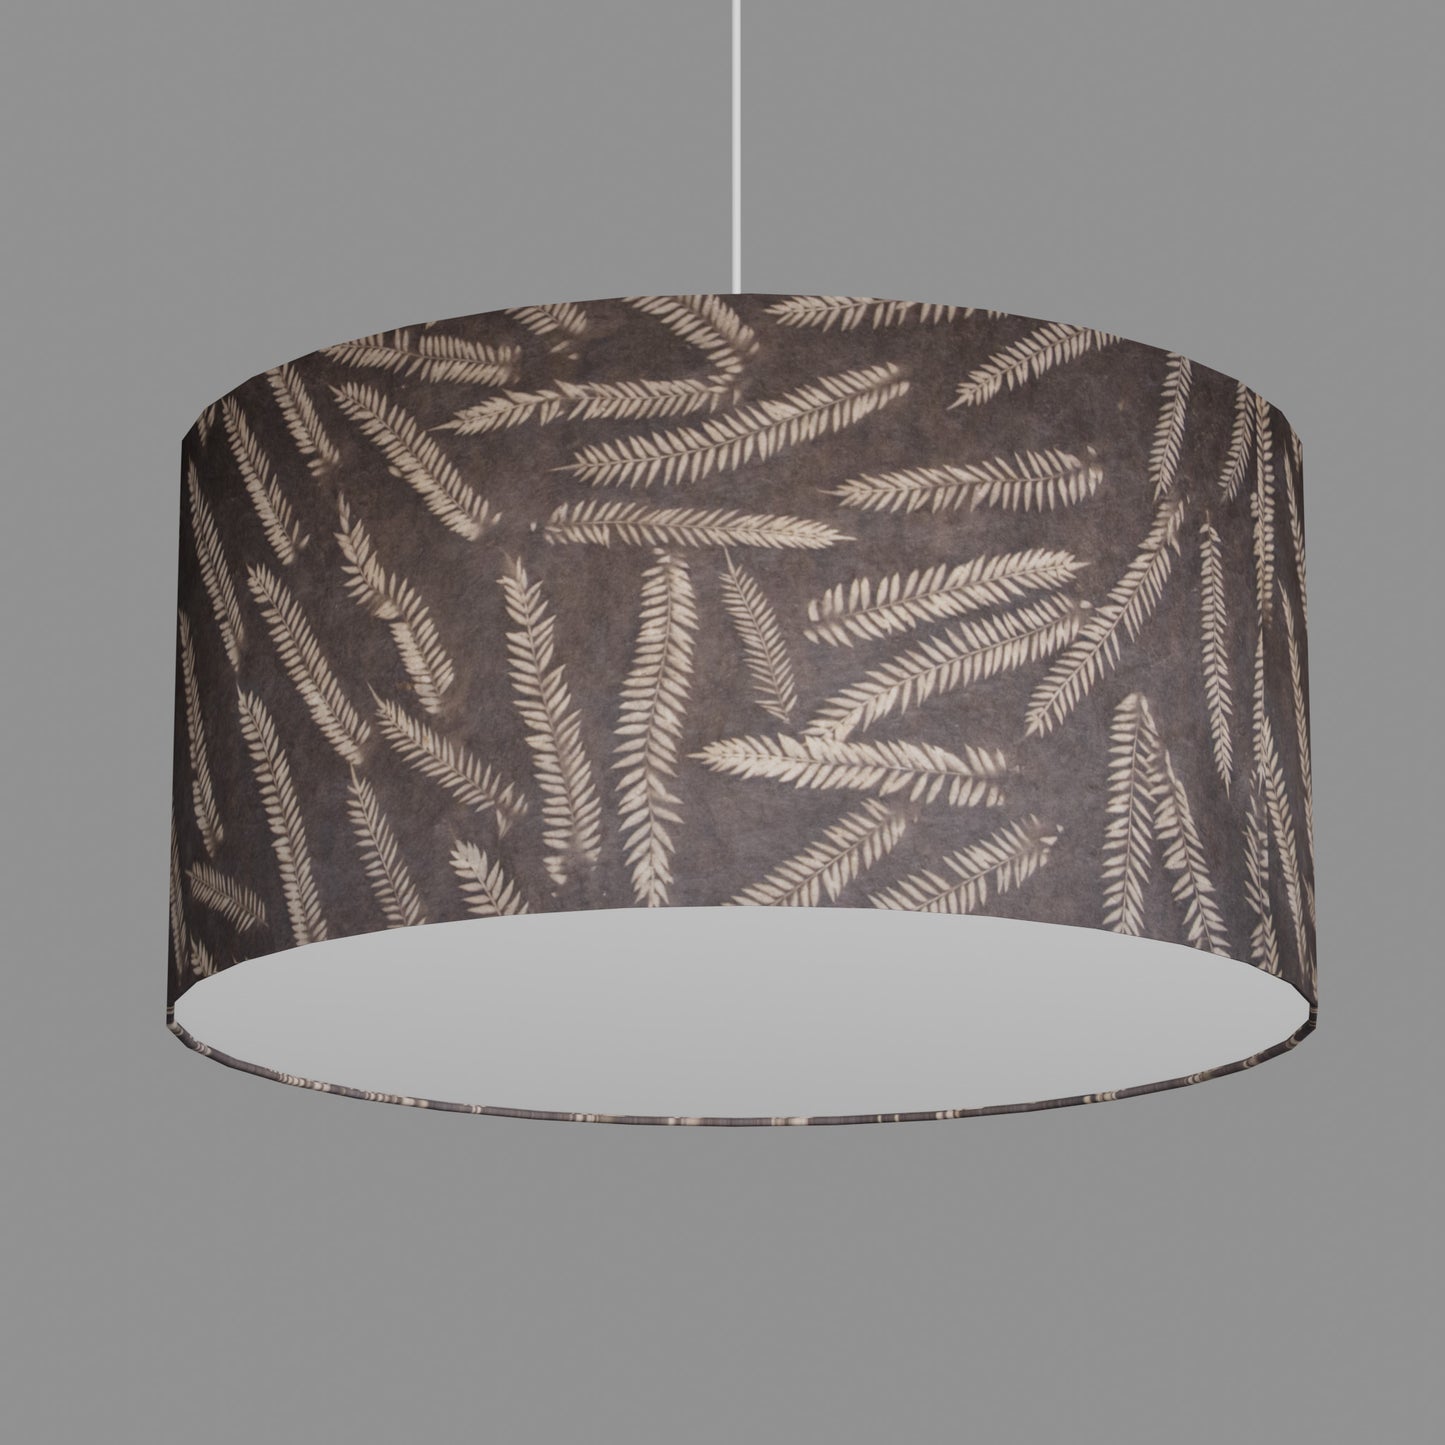 Drum Lamp Shade - P26 - Resistance Dyed Brown Fern, 60cm(d) x 30cm(h)